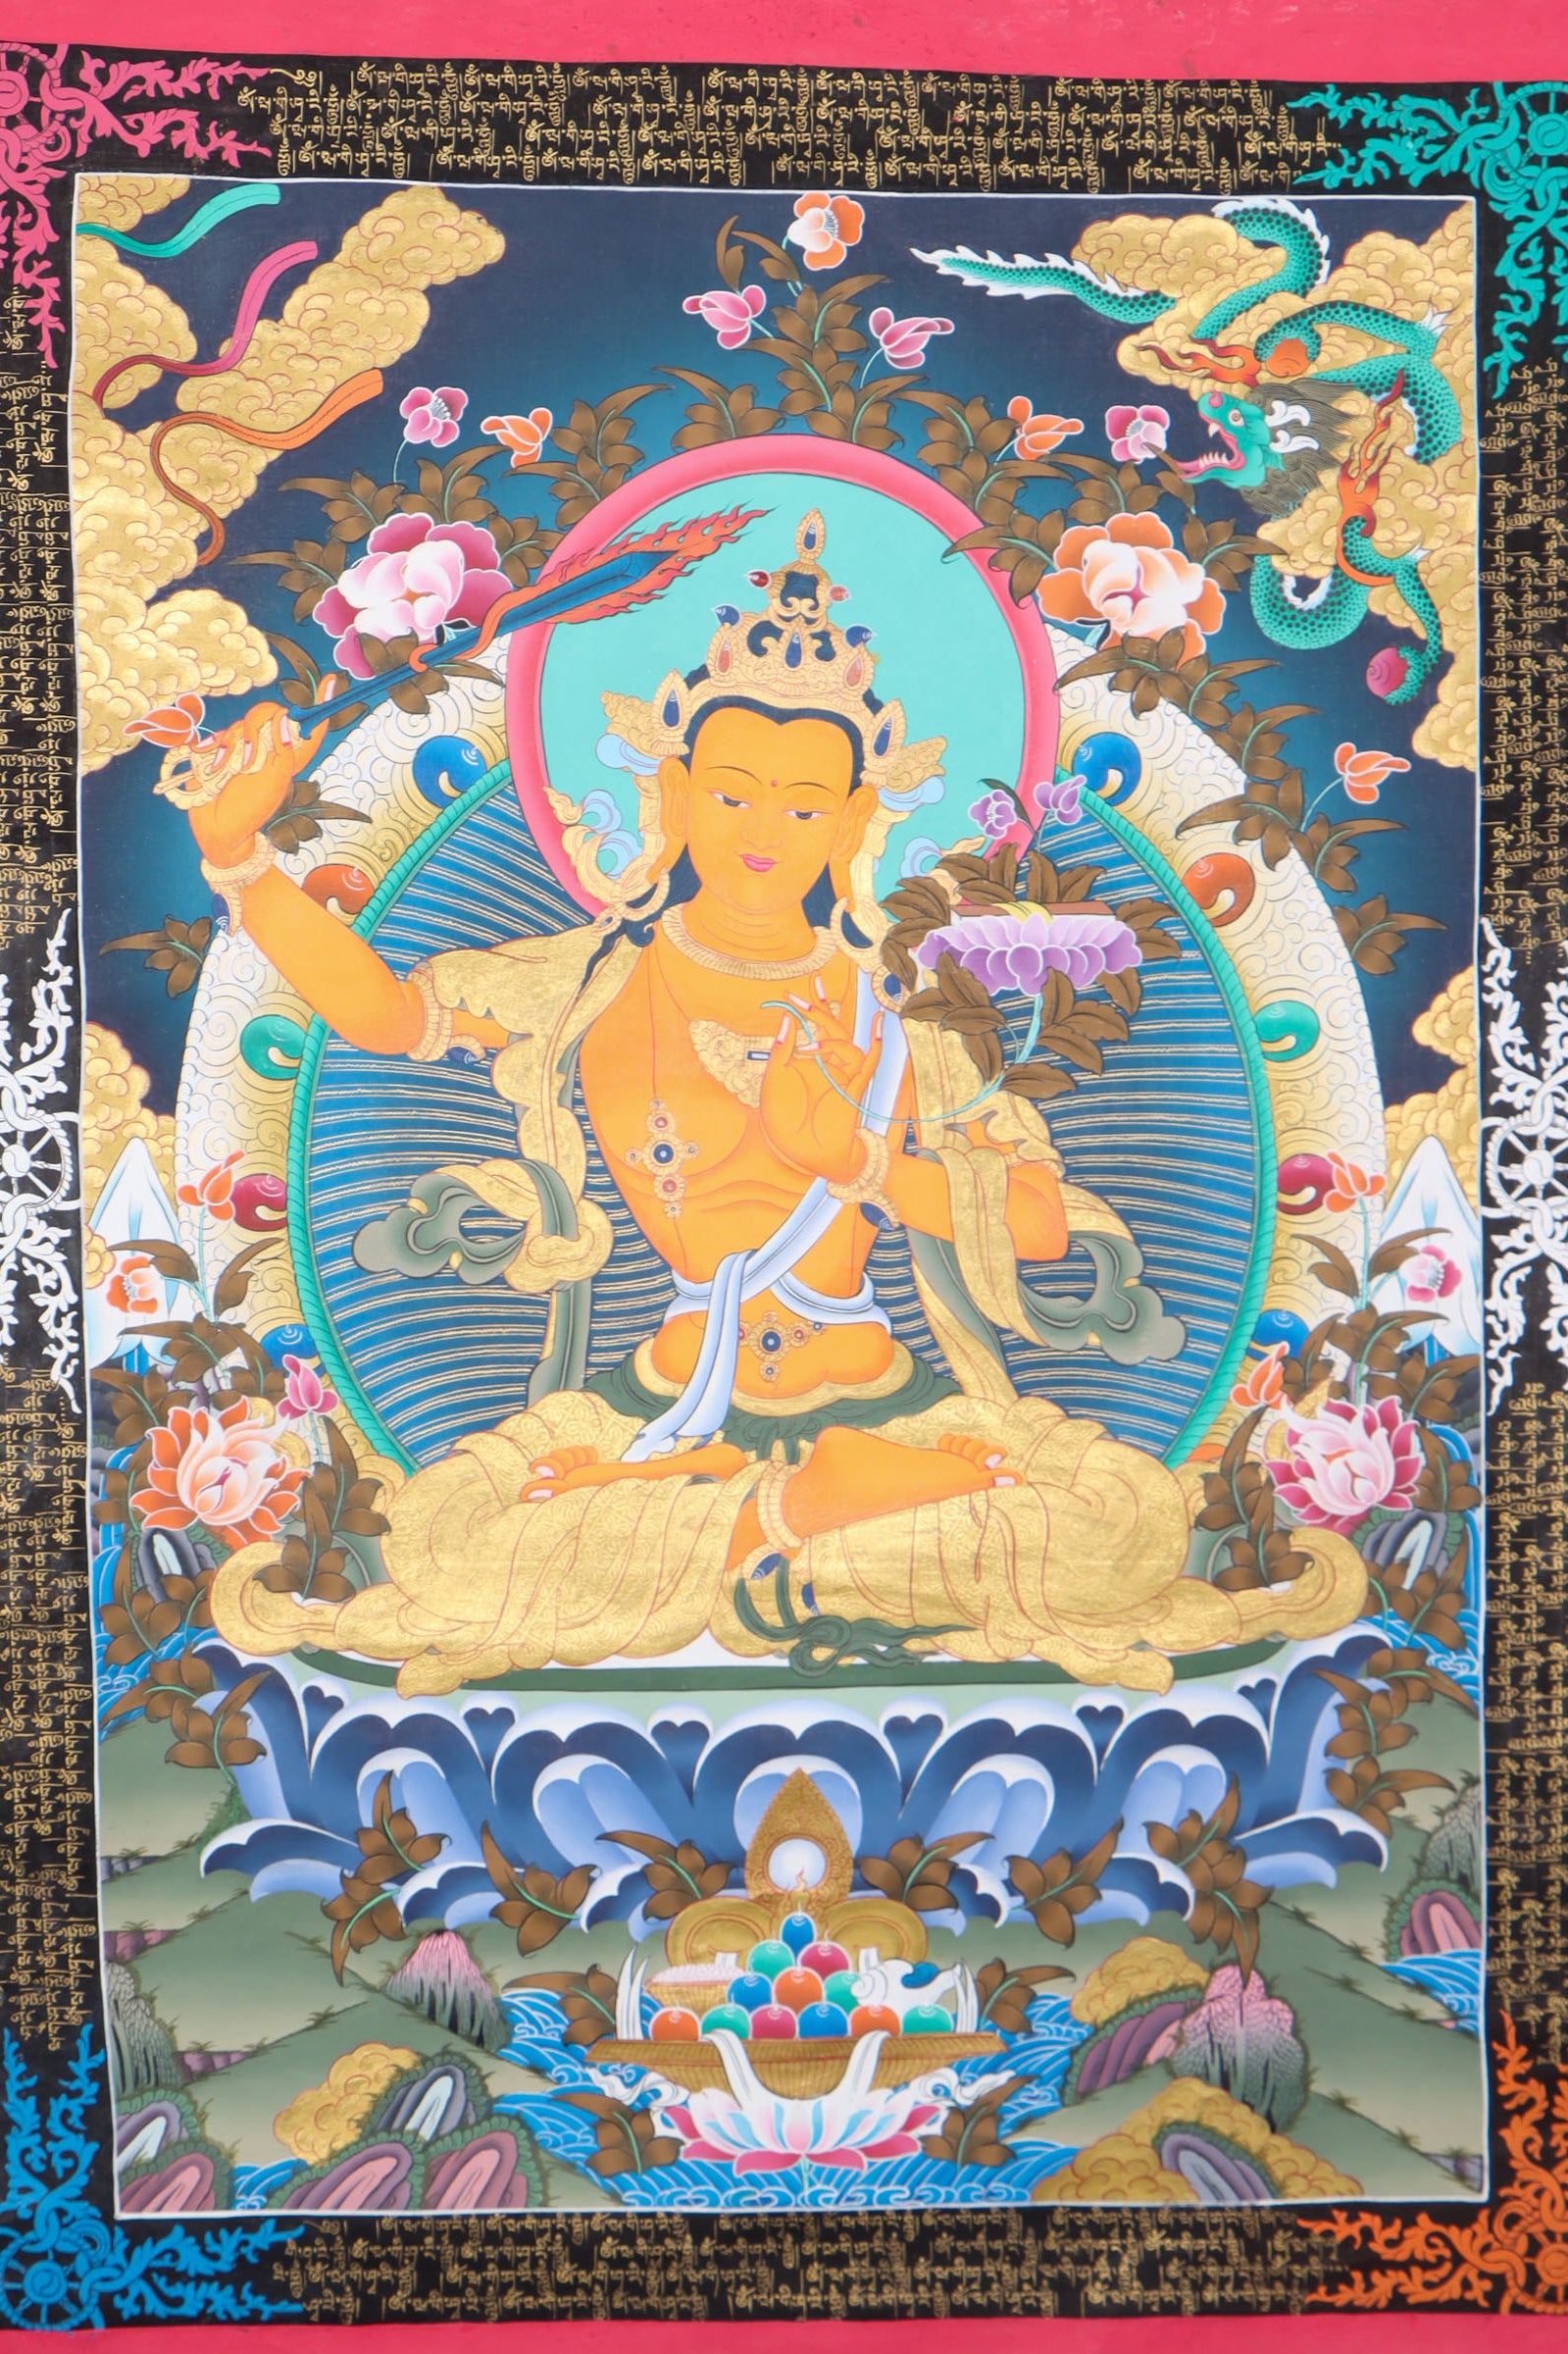 Manjusri Thangka Painting are used in rituals and ceremonies.